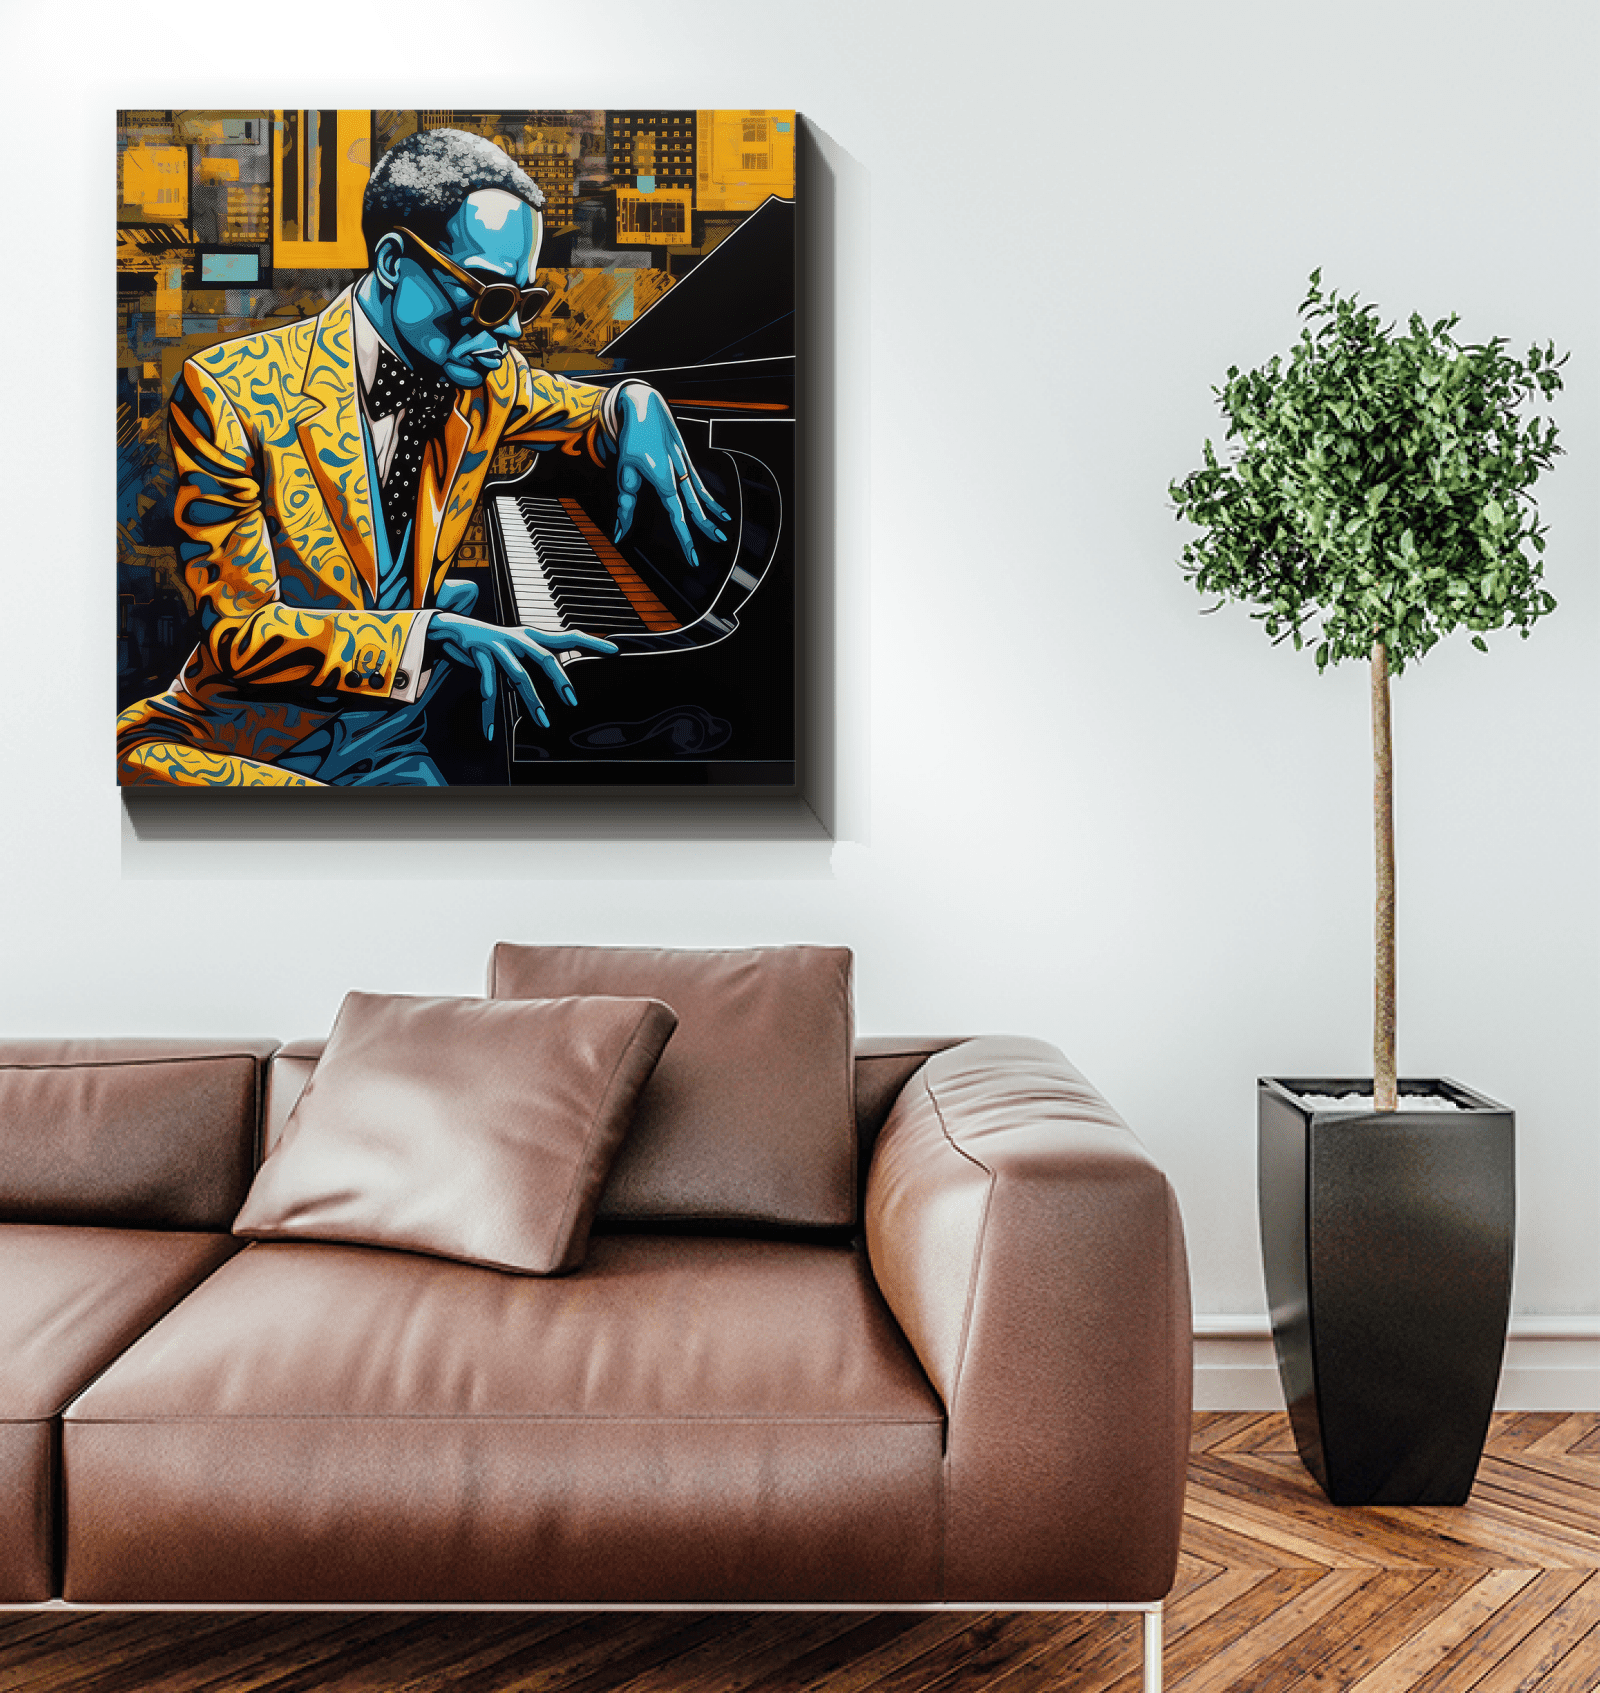 Vibrant wrapped canvas bringing artists' visions to life.